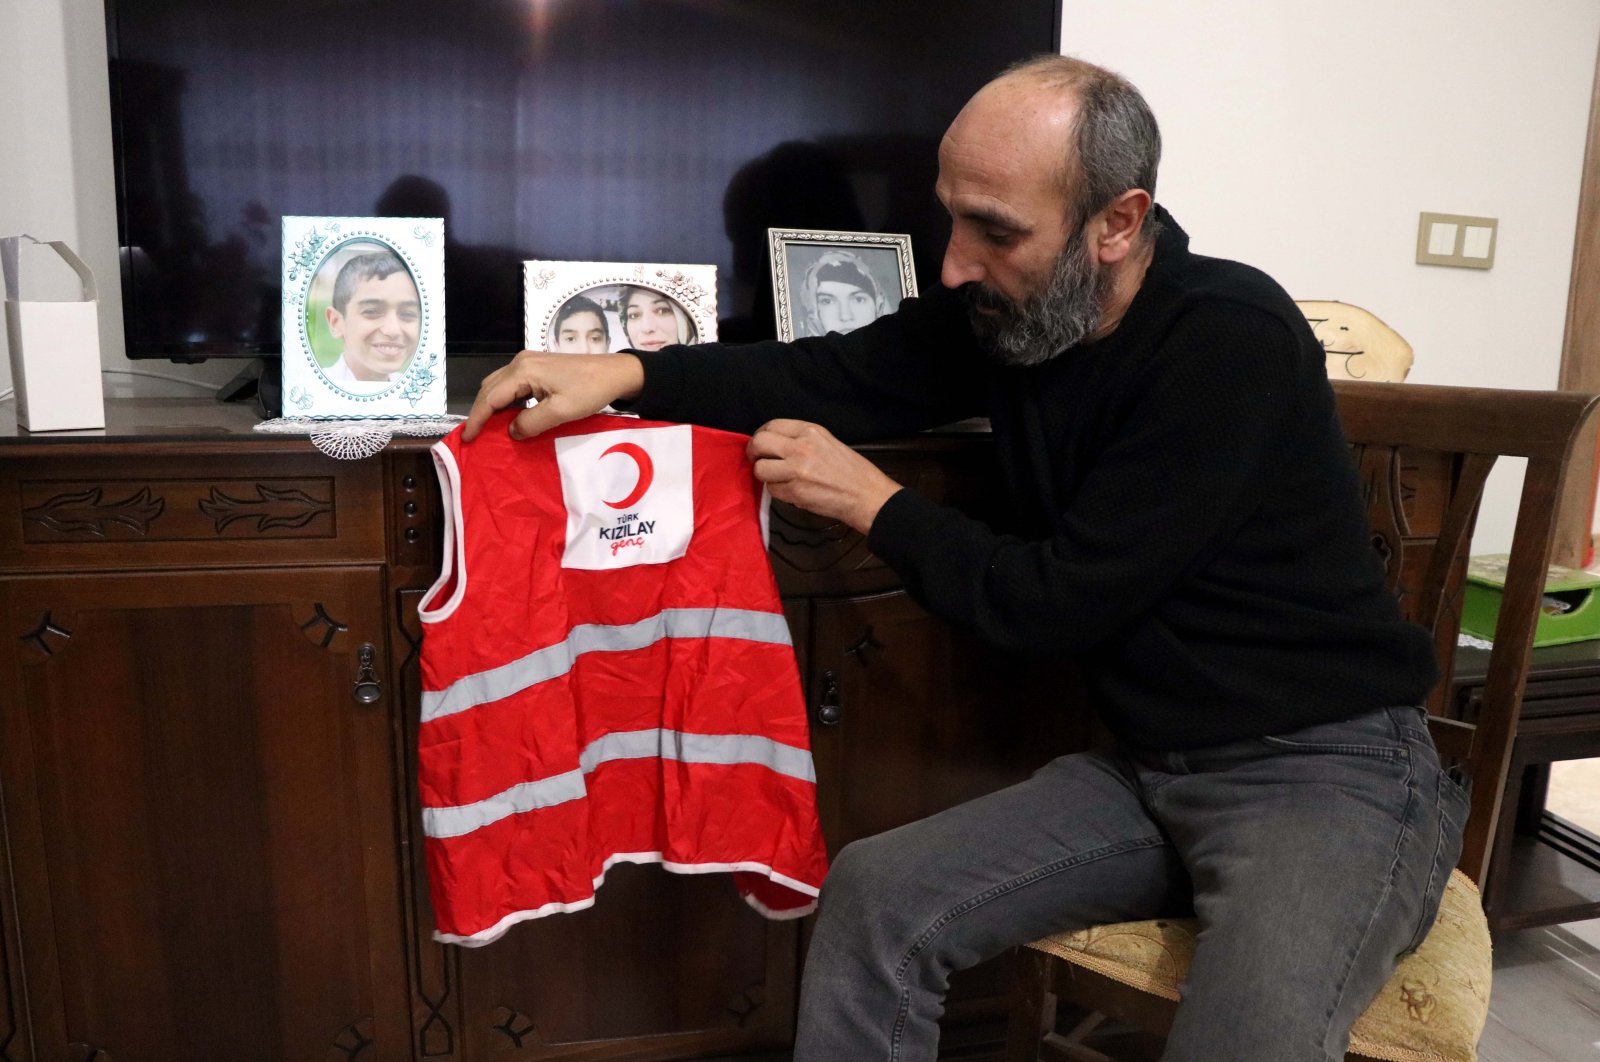 Meriç Dişli looks at a vest worn by his late son Miraç and photos of his son and wife, in Elazığ, eastern Turkey, Jan. 23, 2022. (AA Photo)